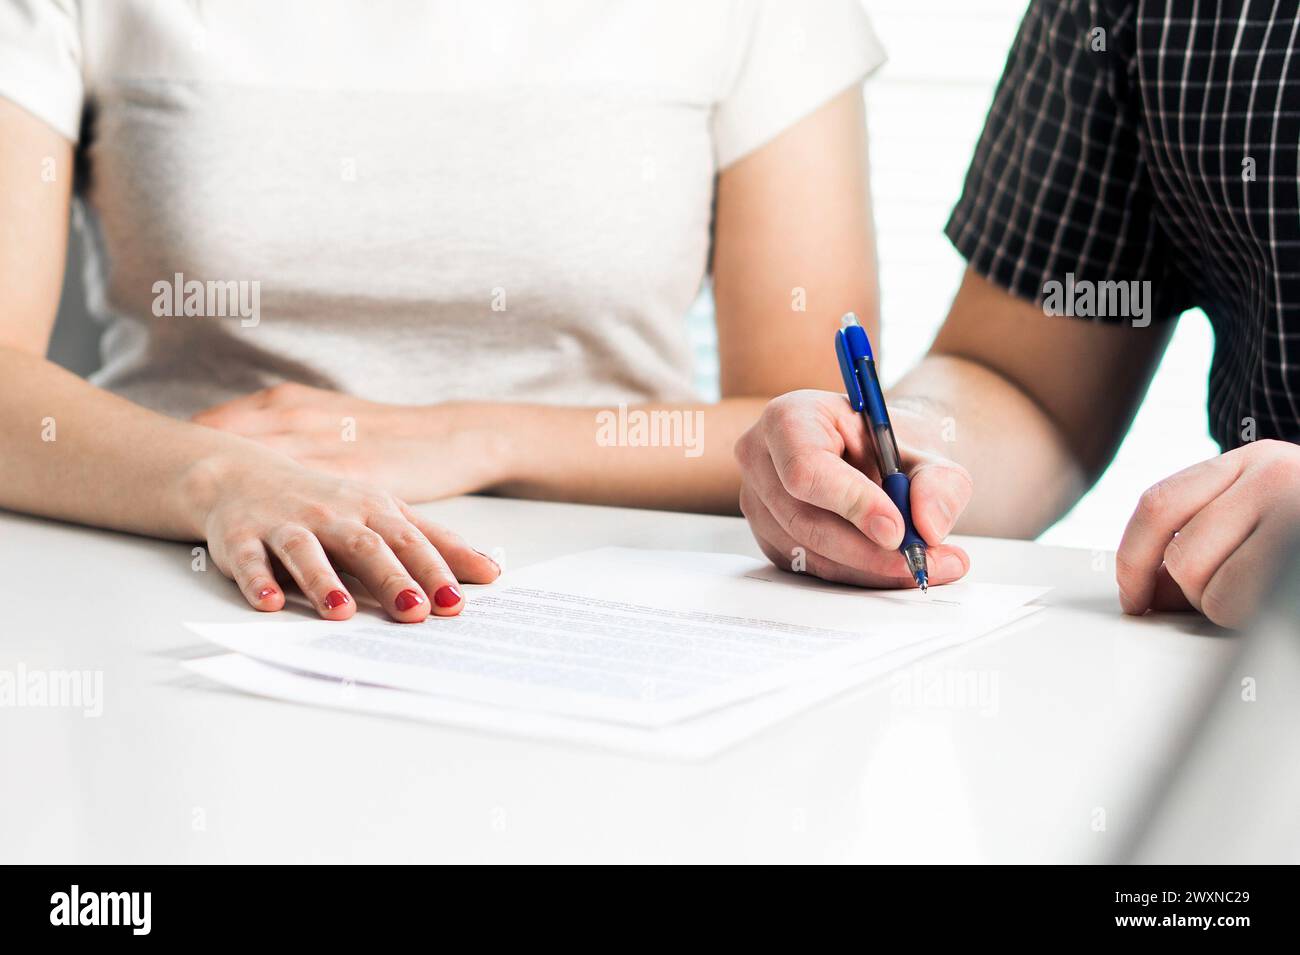 Divorce agreement. Couple signing legal document. Prenuptial marriage settlement, prenup. Lawyer meeting. Separation, breakup or lawsuit. Stock Photo